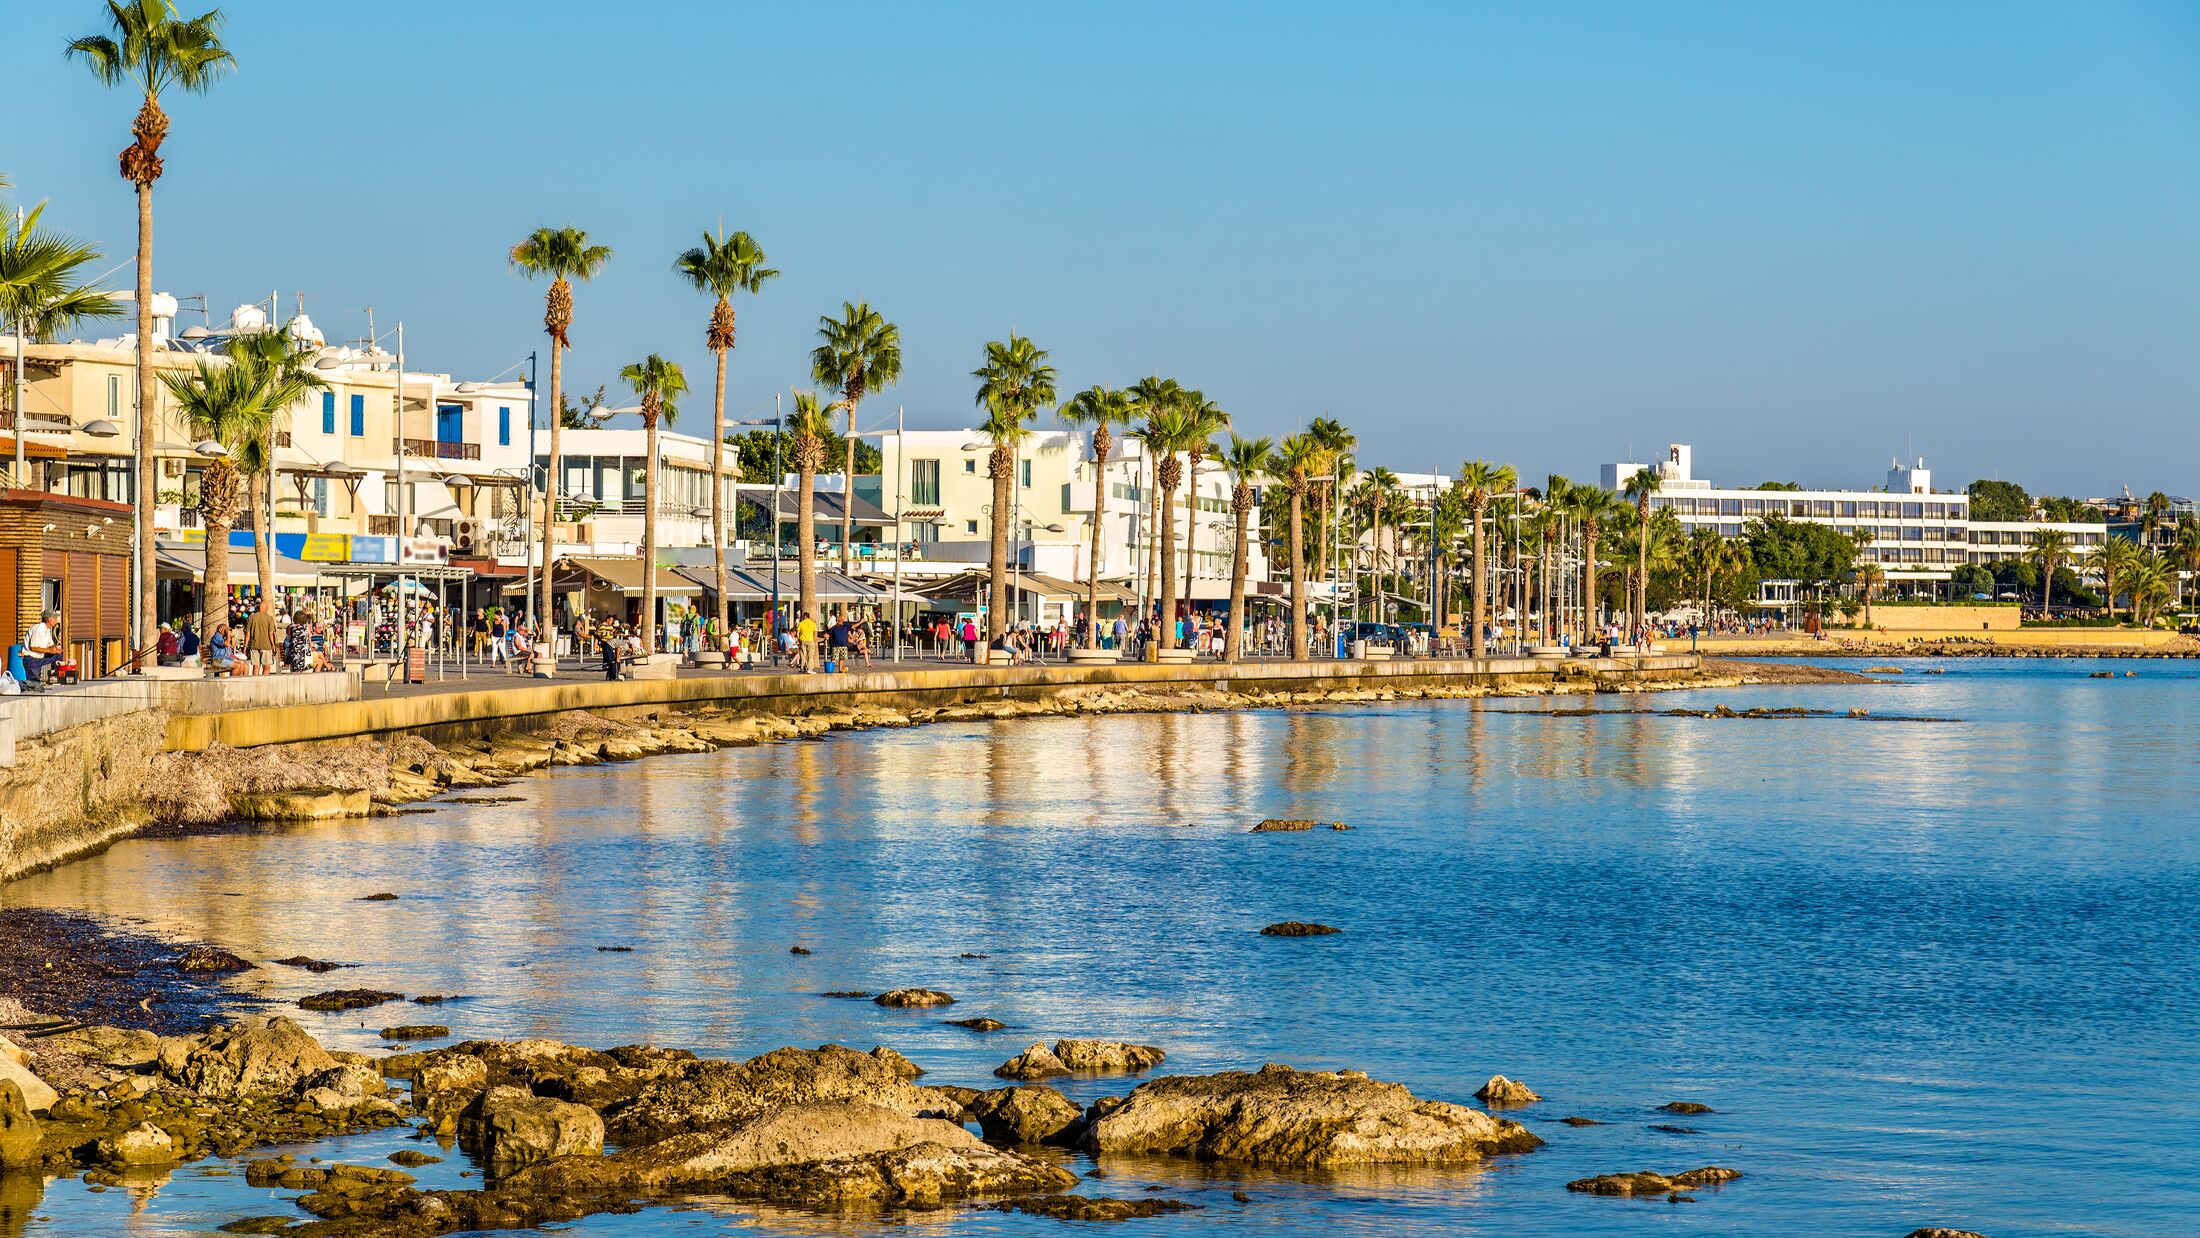 View of embankment at Paphos Harbour - Cyprus